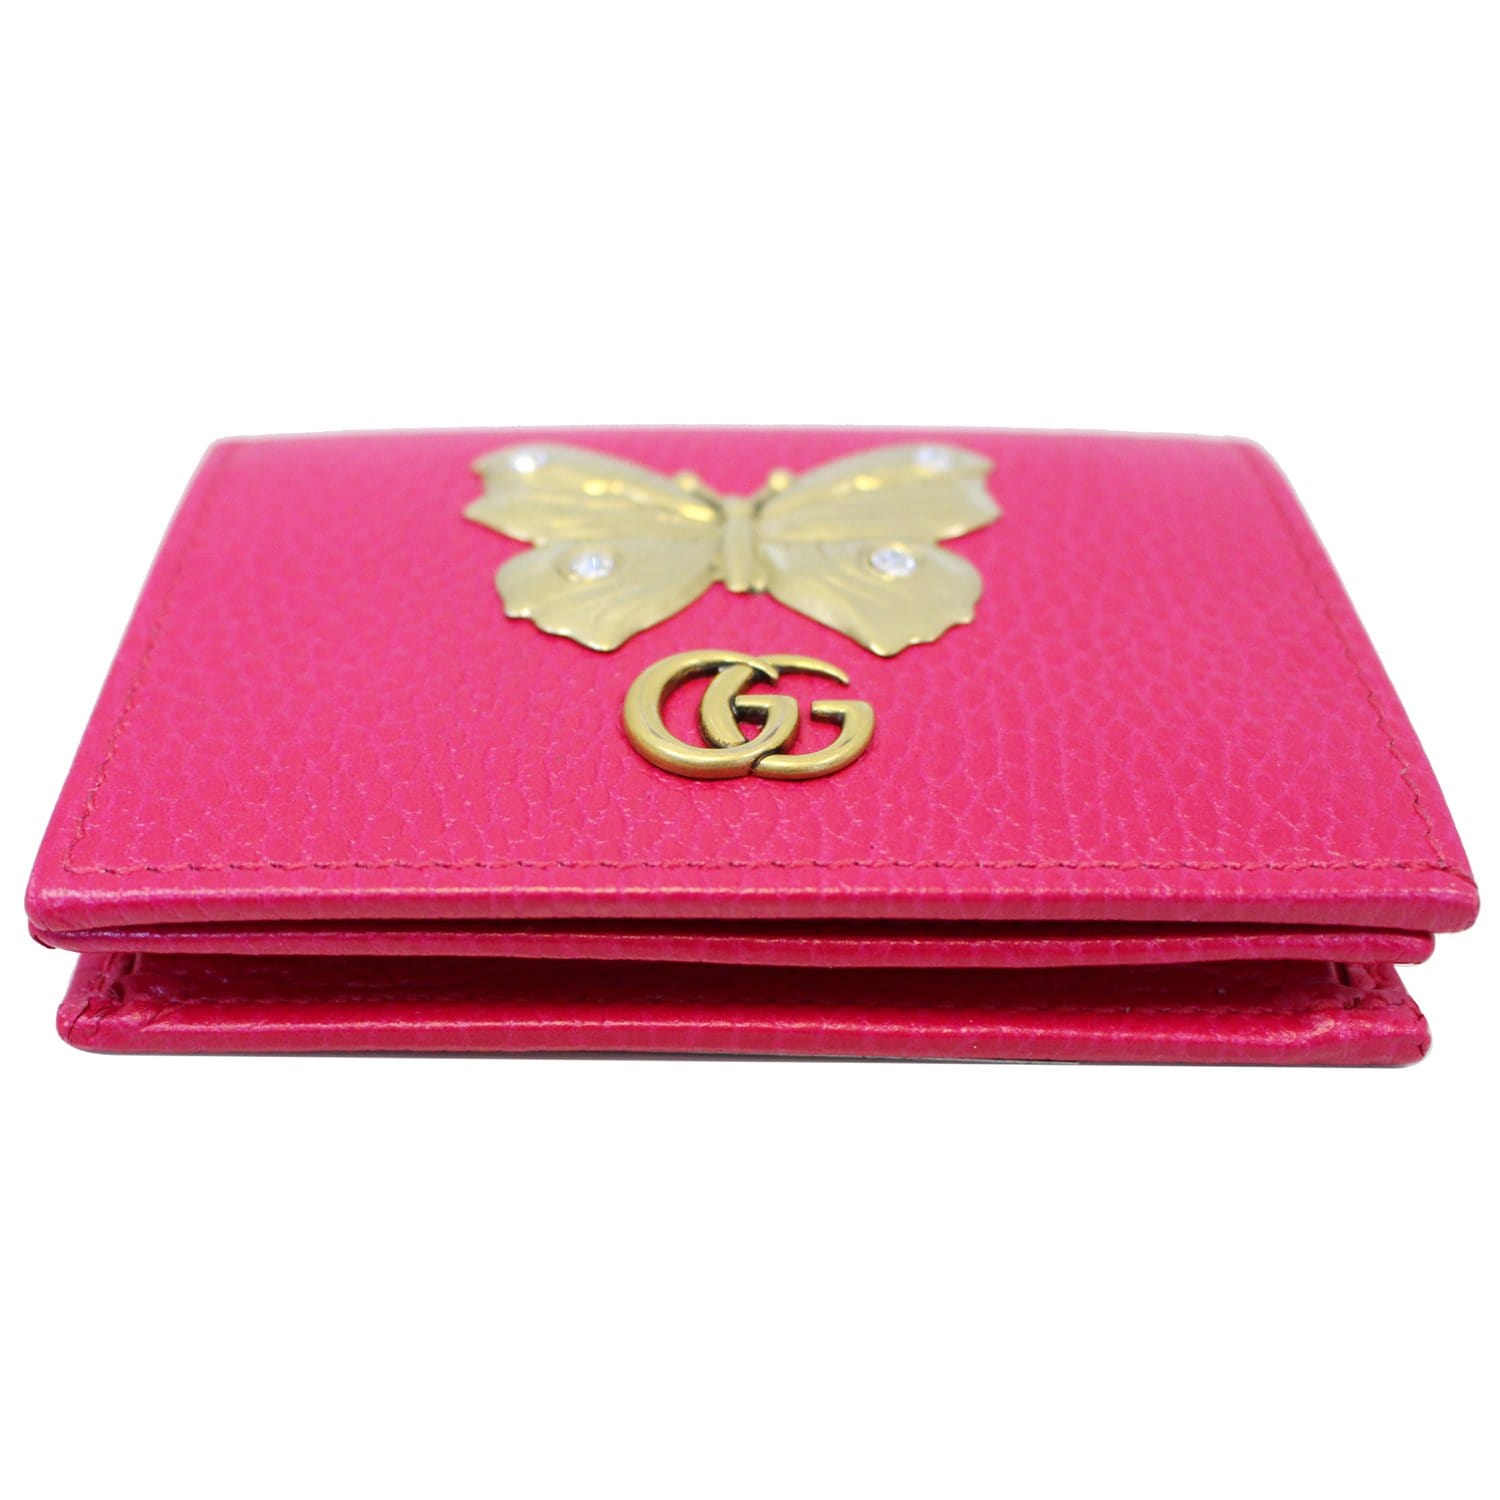 Auth GUCCI Card Holder Card Case Business Card Holder GG Leather Pink useed